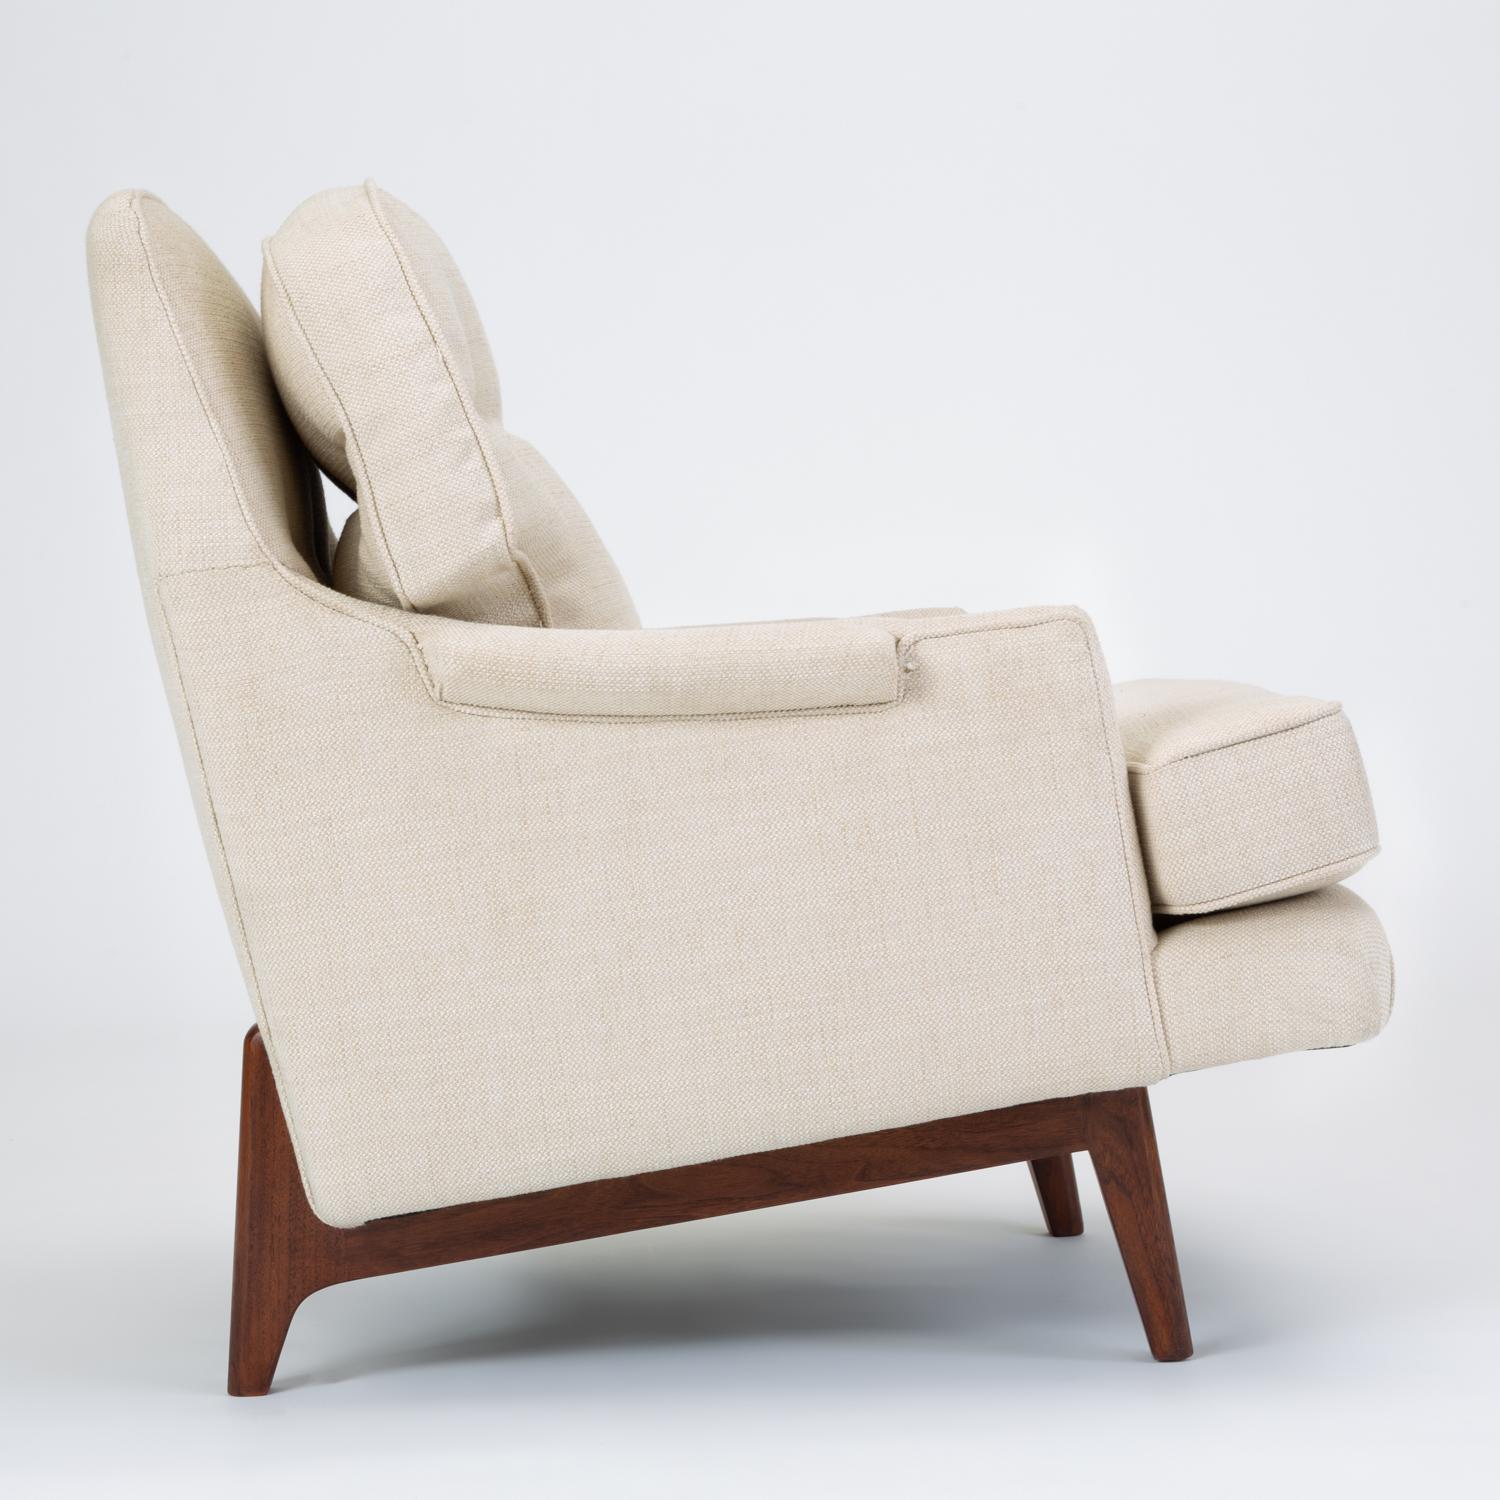 Lounge Chair with Bracket Base by Roger Sprunger for Dunbar 2